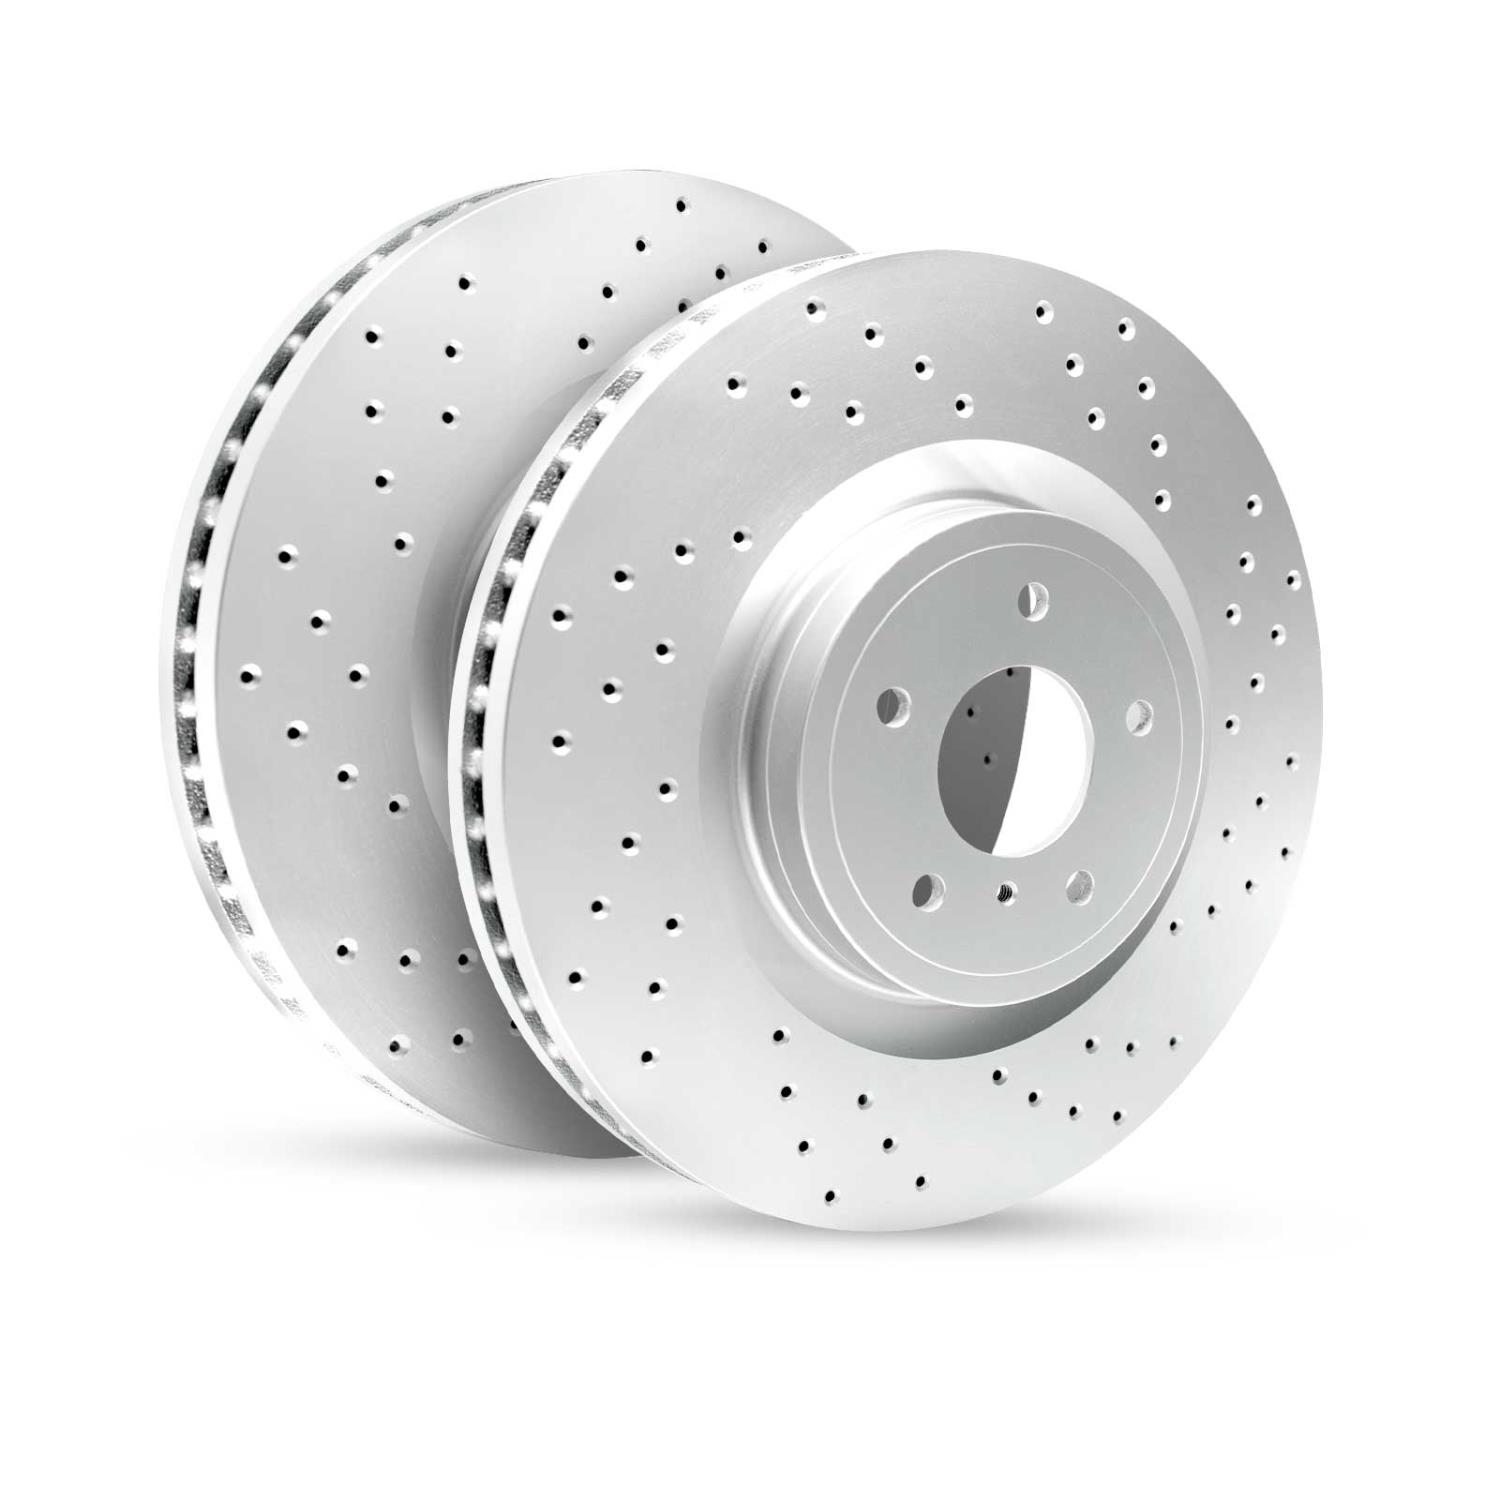 GEO-Carbon Drilled/Slotted Rotors, 1991-2004 Fits Multiple Makes/Models, Position: Front